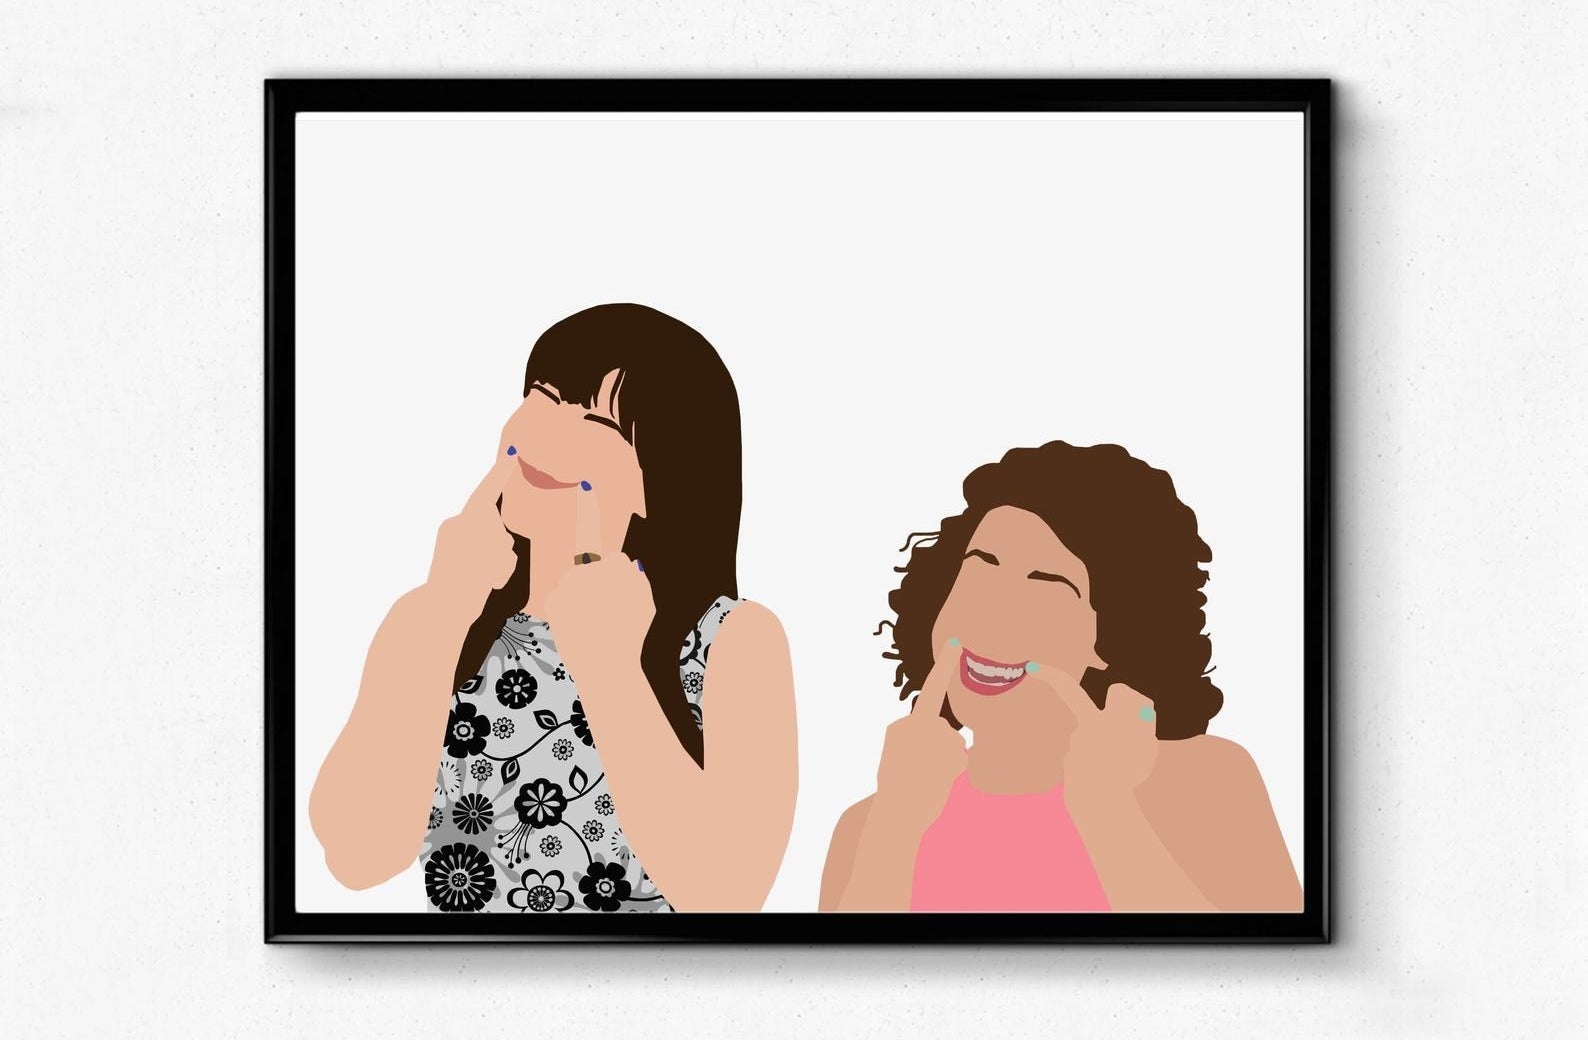 A print with Abby and Ilana making fake smiles with their middle fingers